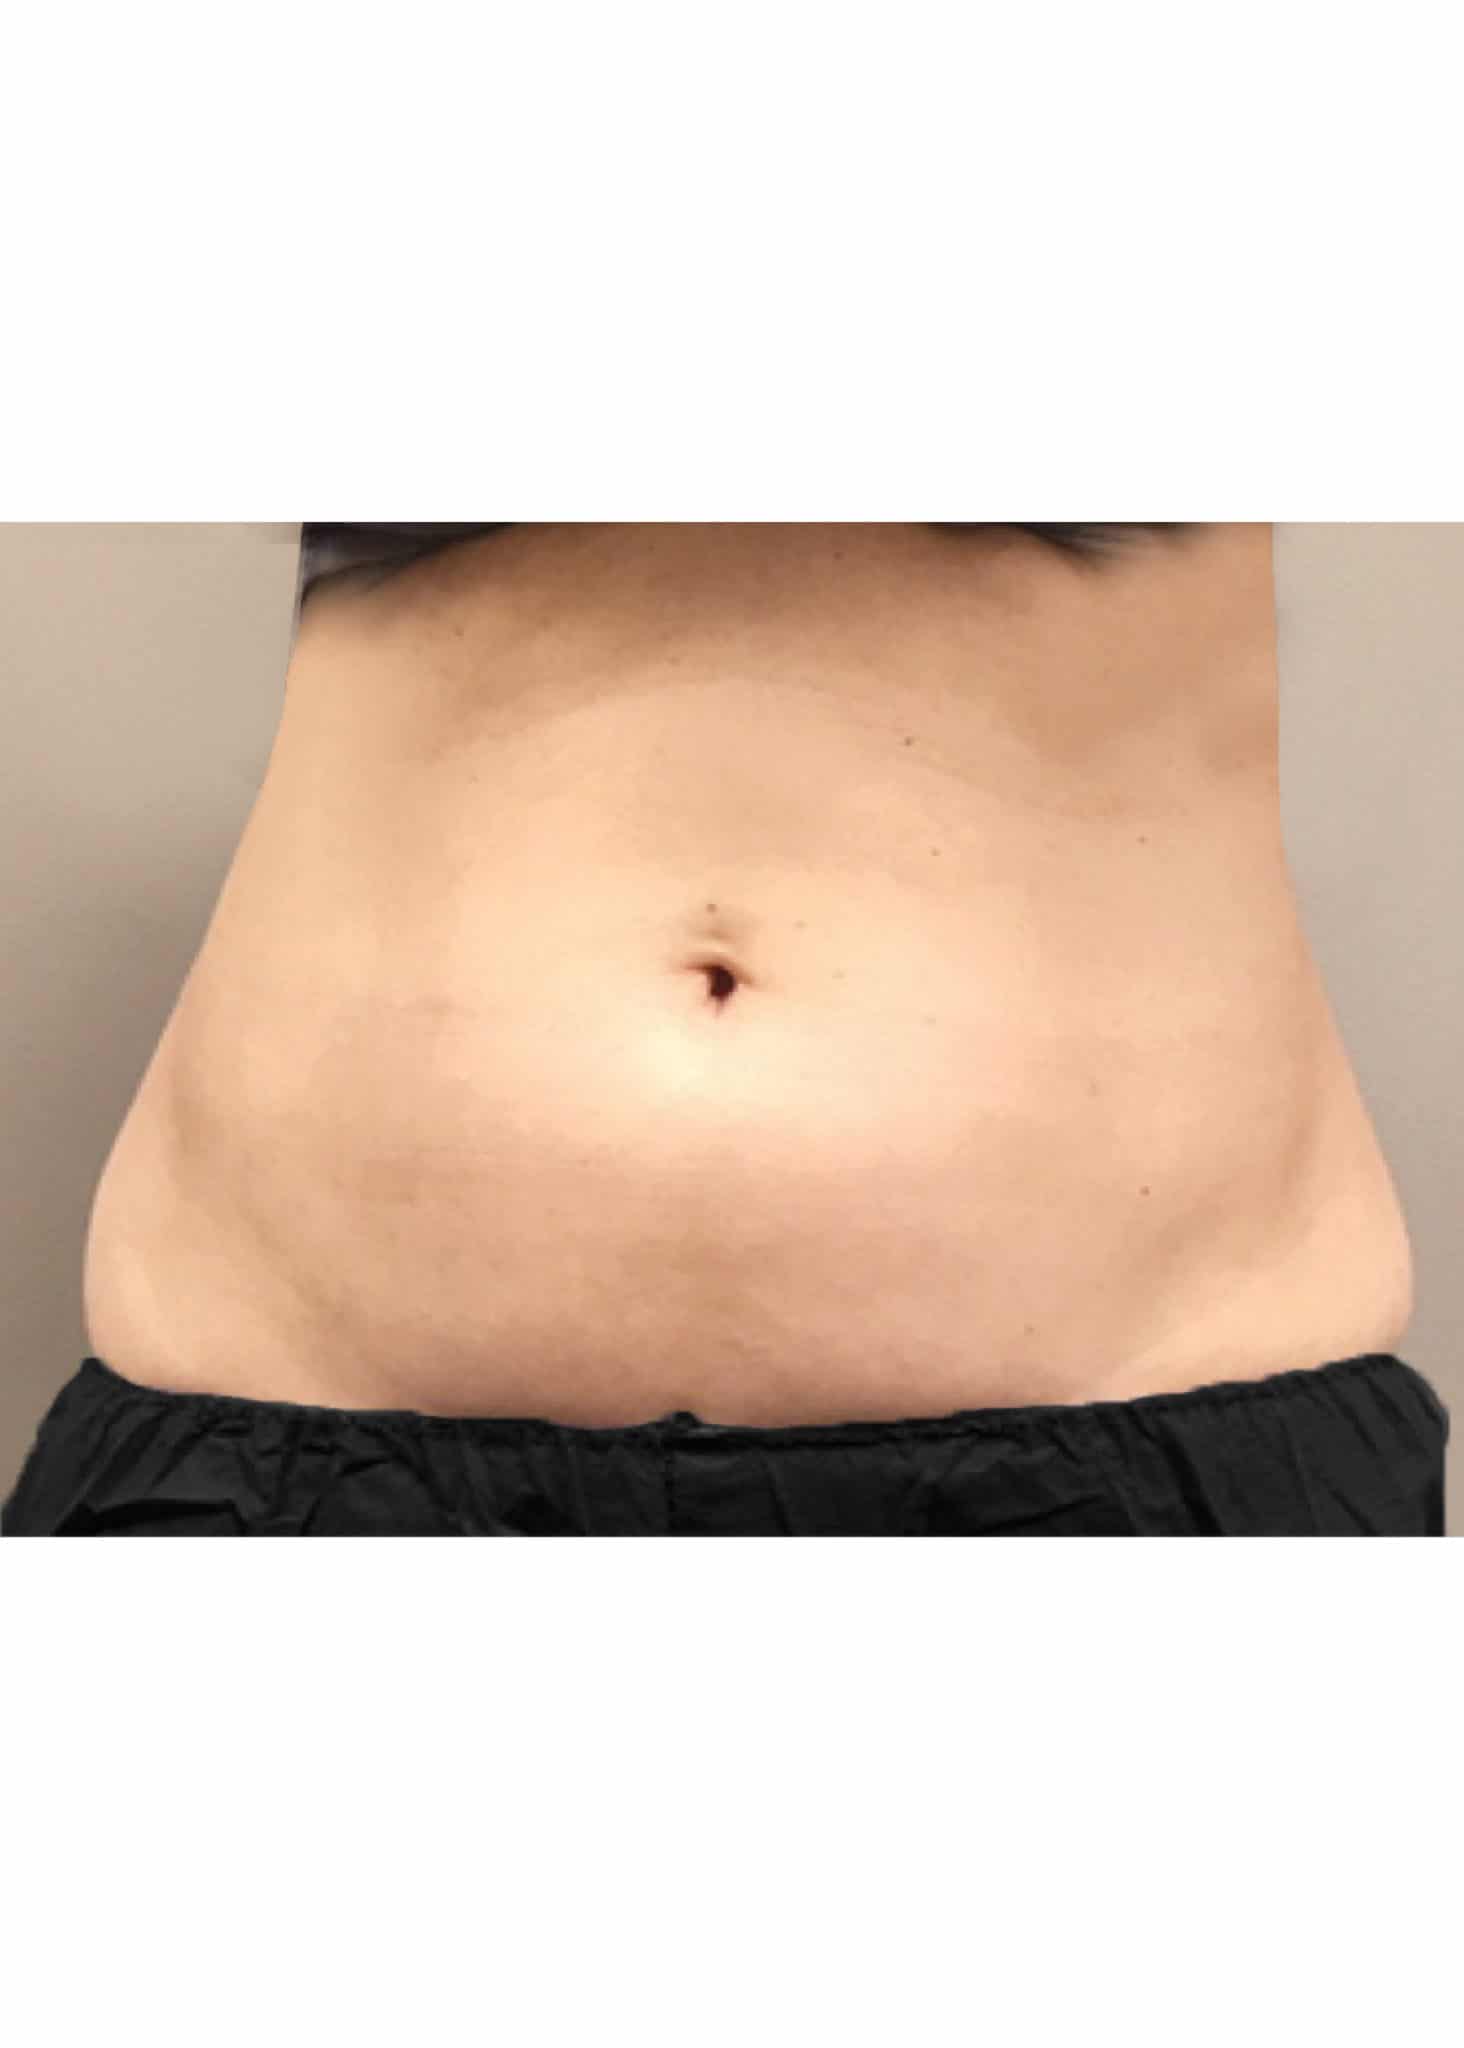 TheSkinCenter ProviderPages BobbiNaples CoolSculpting Before 2 1464x2048 1